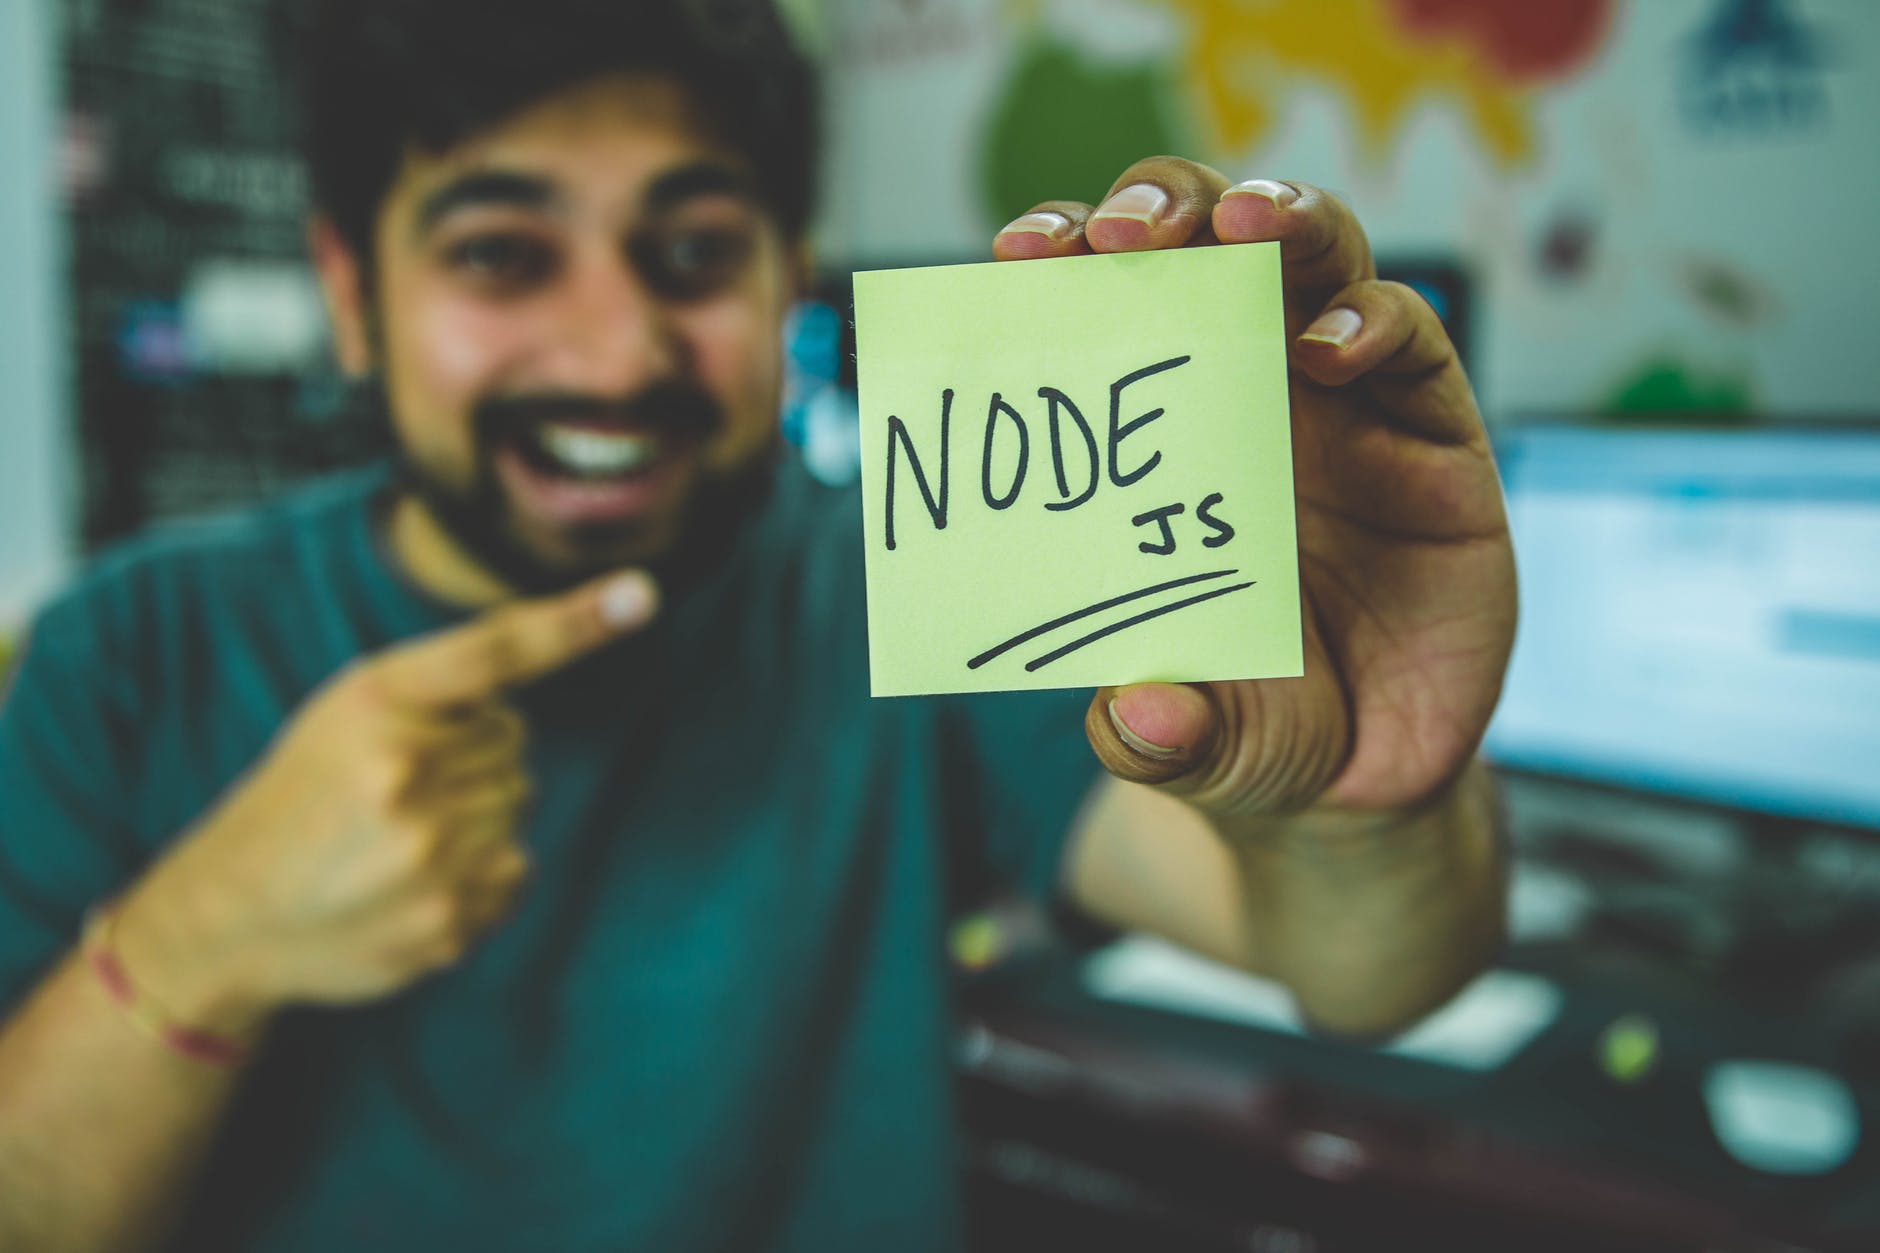 person holding node text